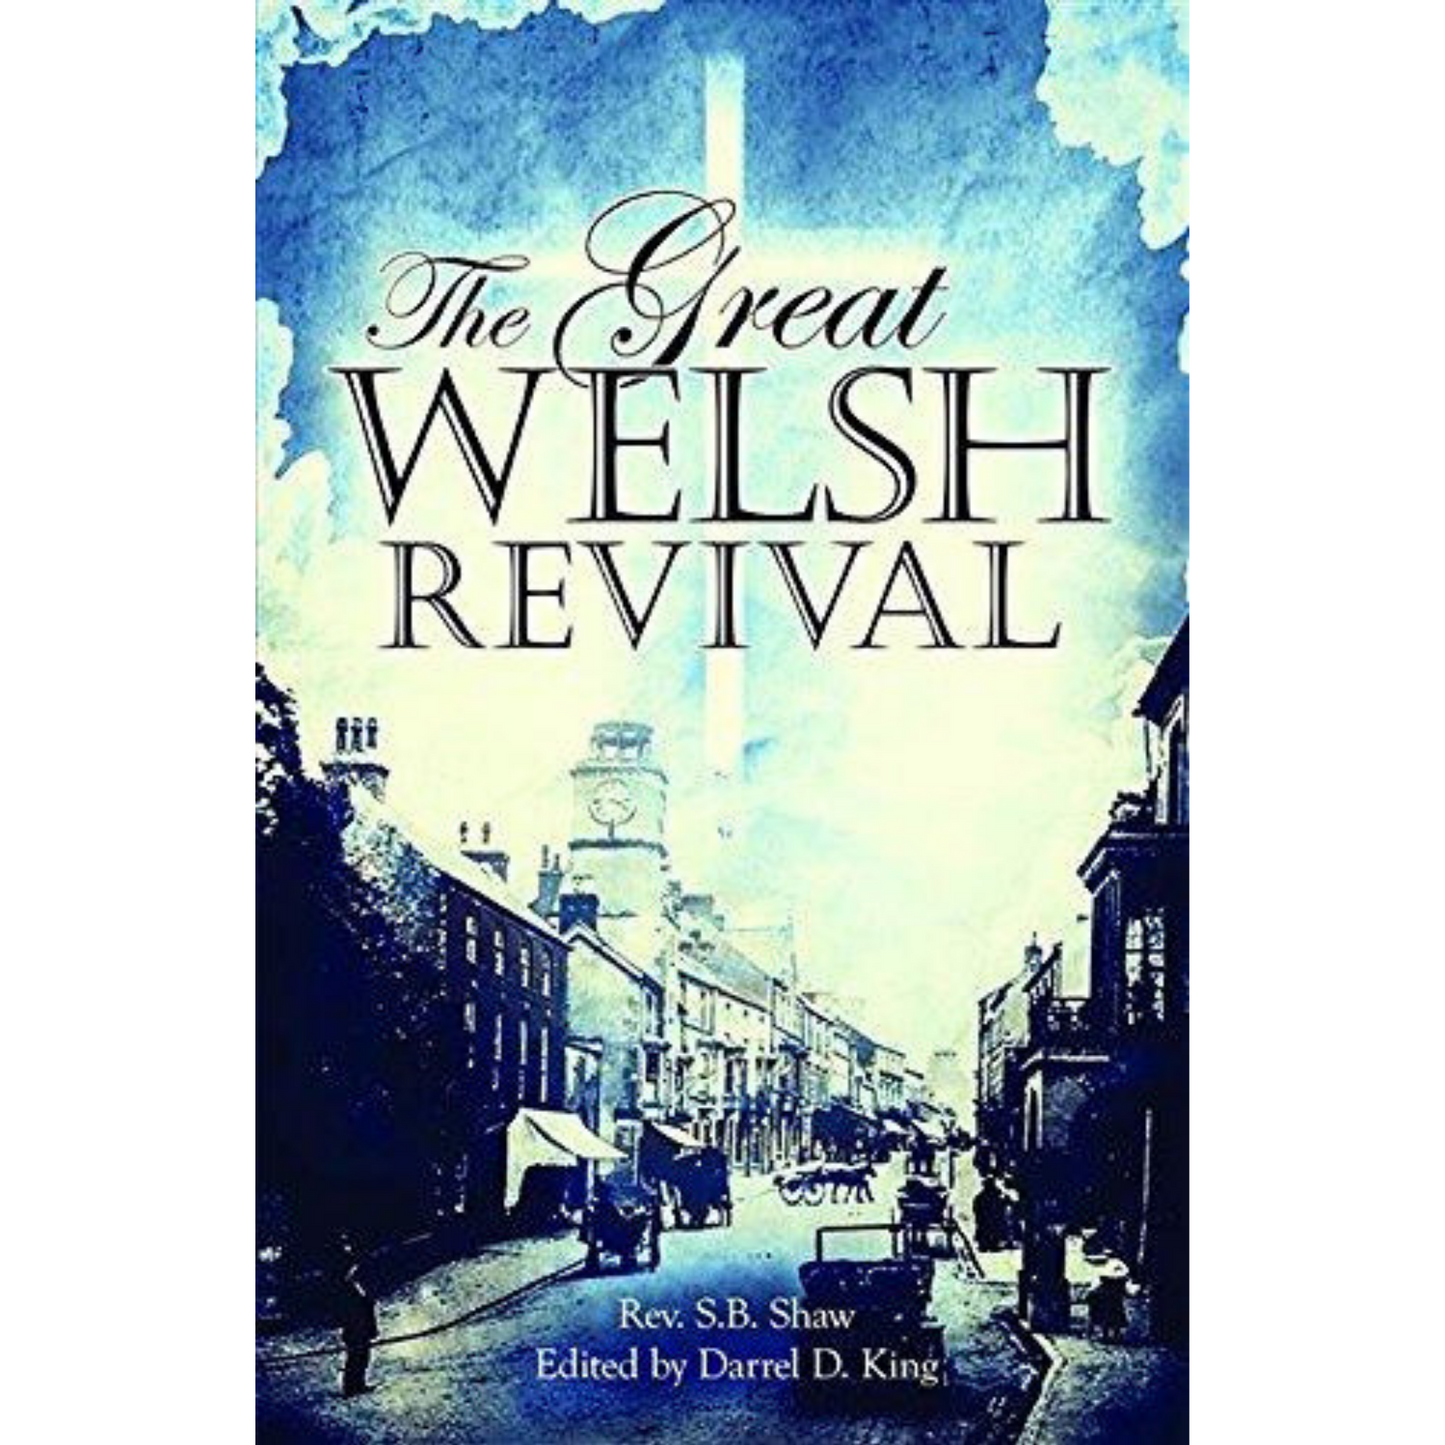 The Great Welsh Revival